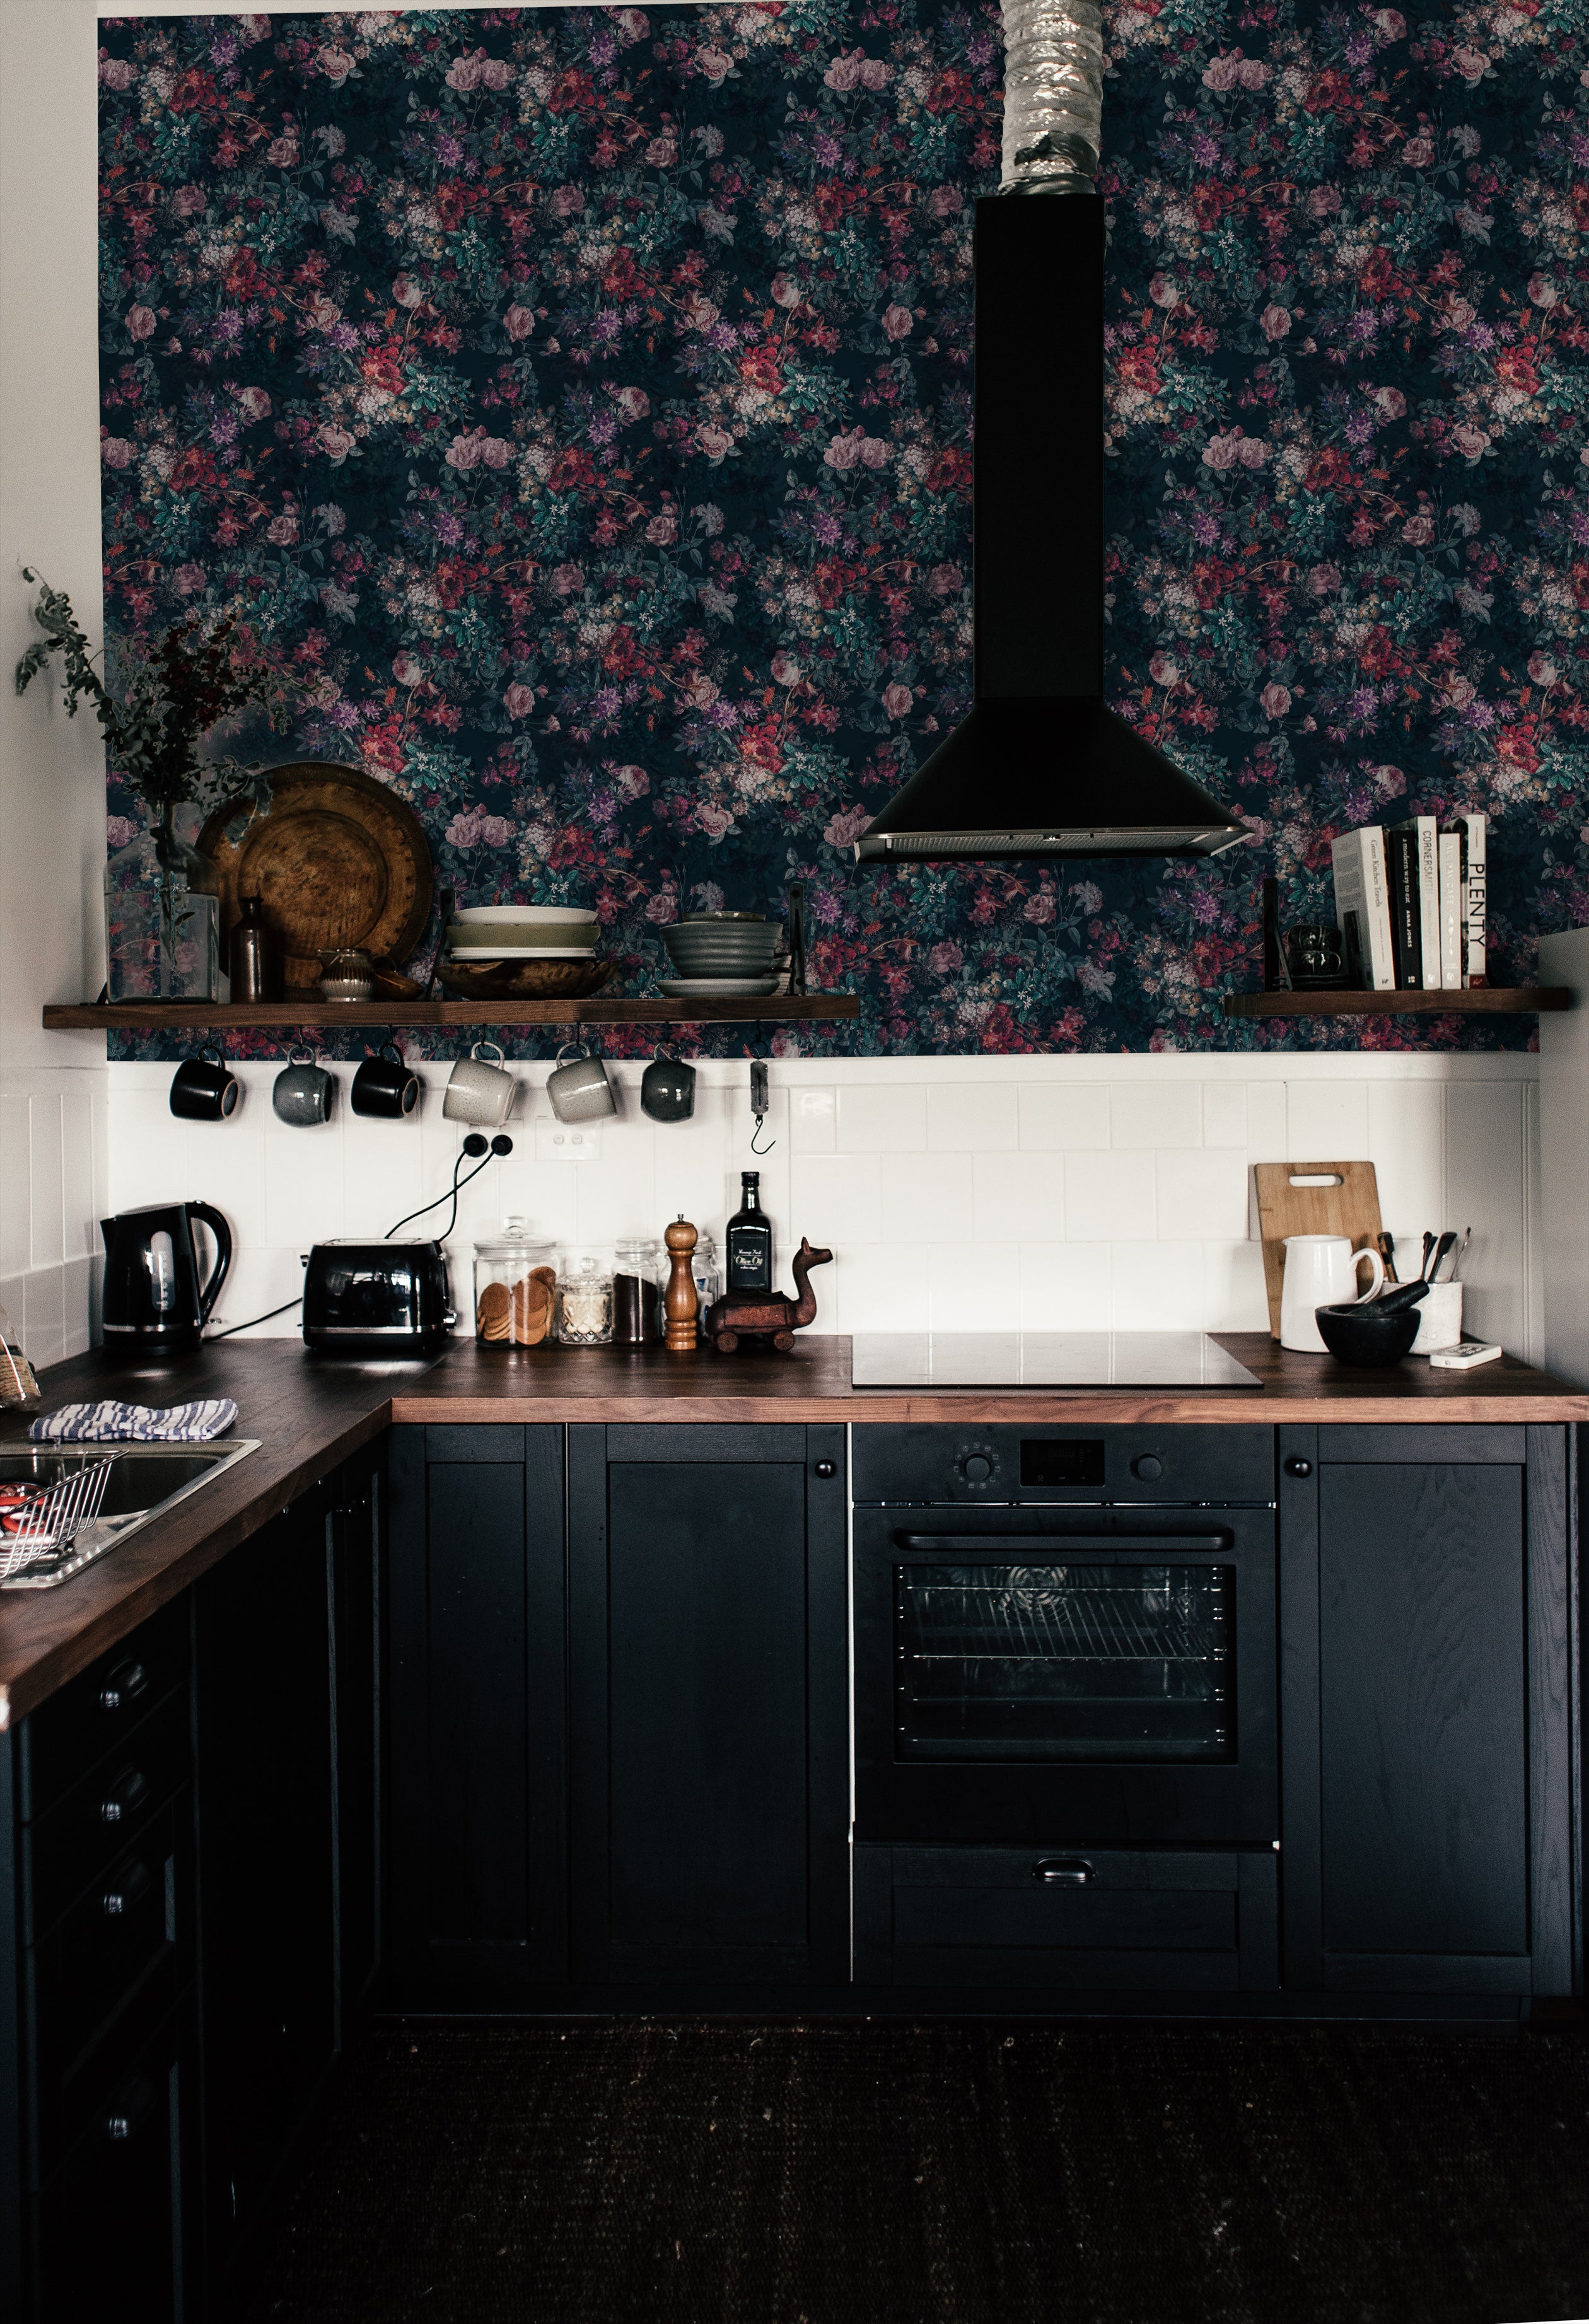 A stylish kitchen featuring the "Dark Luxury Floral Wallpaper - 25" as a backdrop above a white subway tile backsplash. The wallpaper displays a rich, dark floral pattern with dense clusters of roses and other flowers in shades of pink, red, and purple on a deep navy background, complementing the dark wood cabinetry and modern appliances.